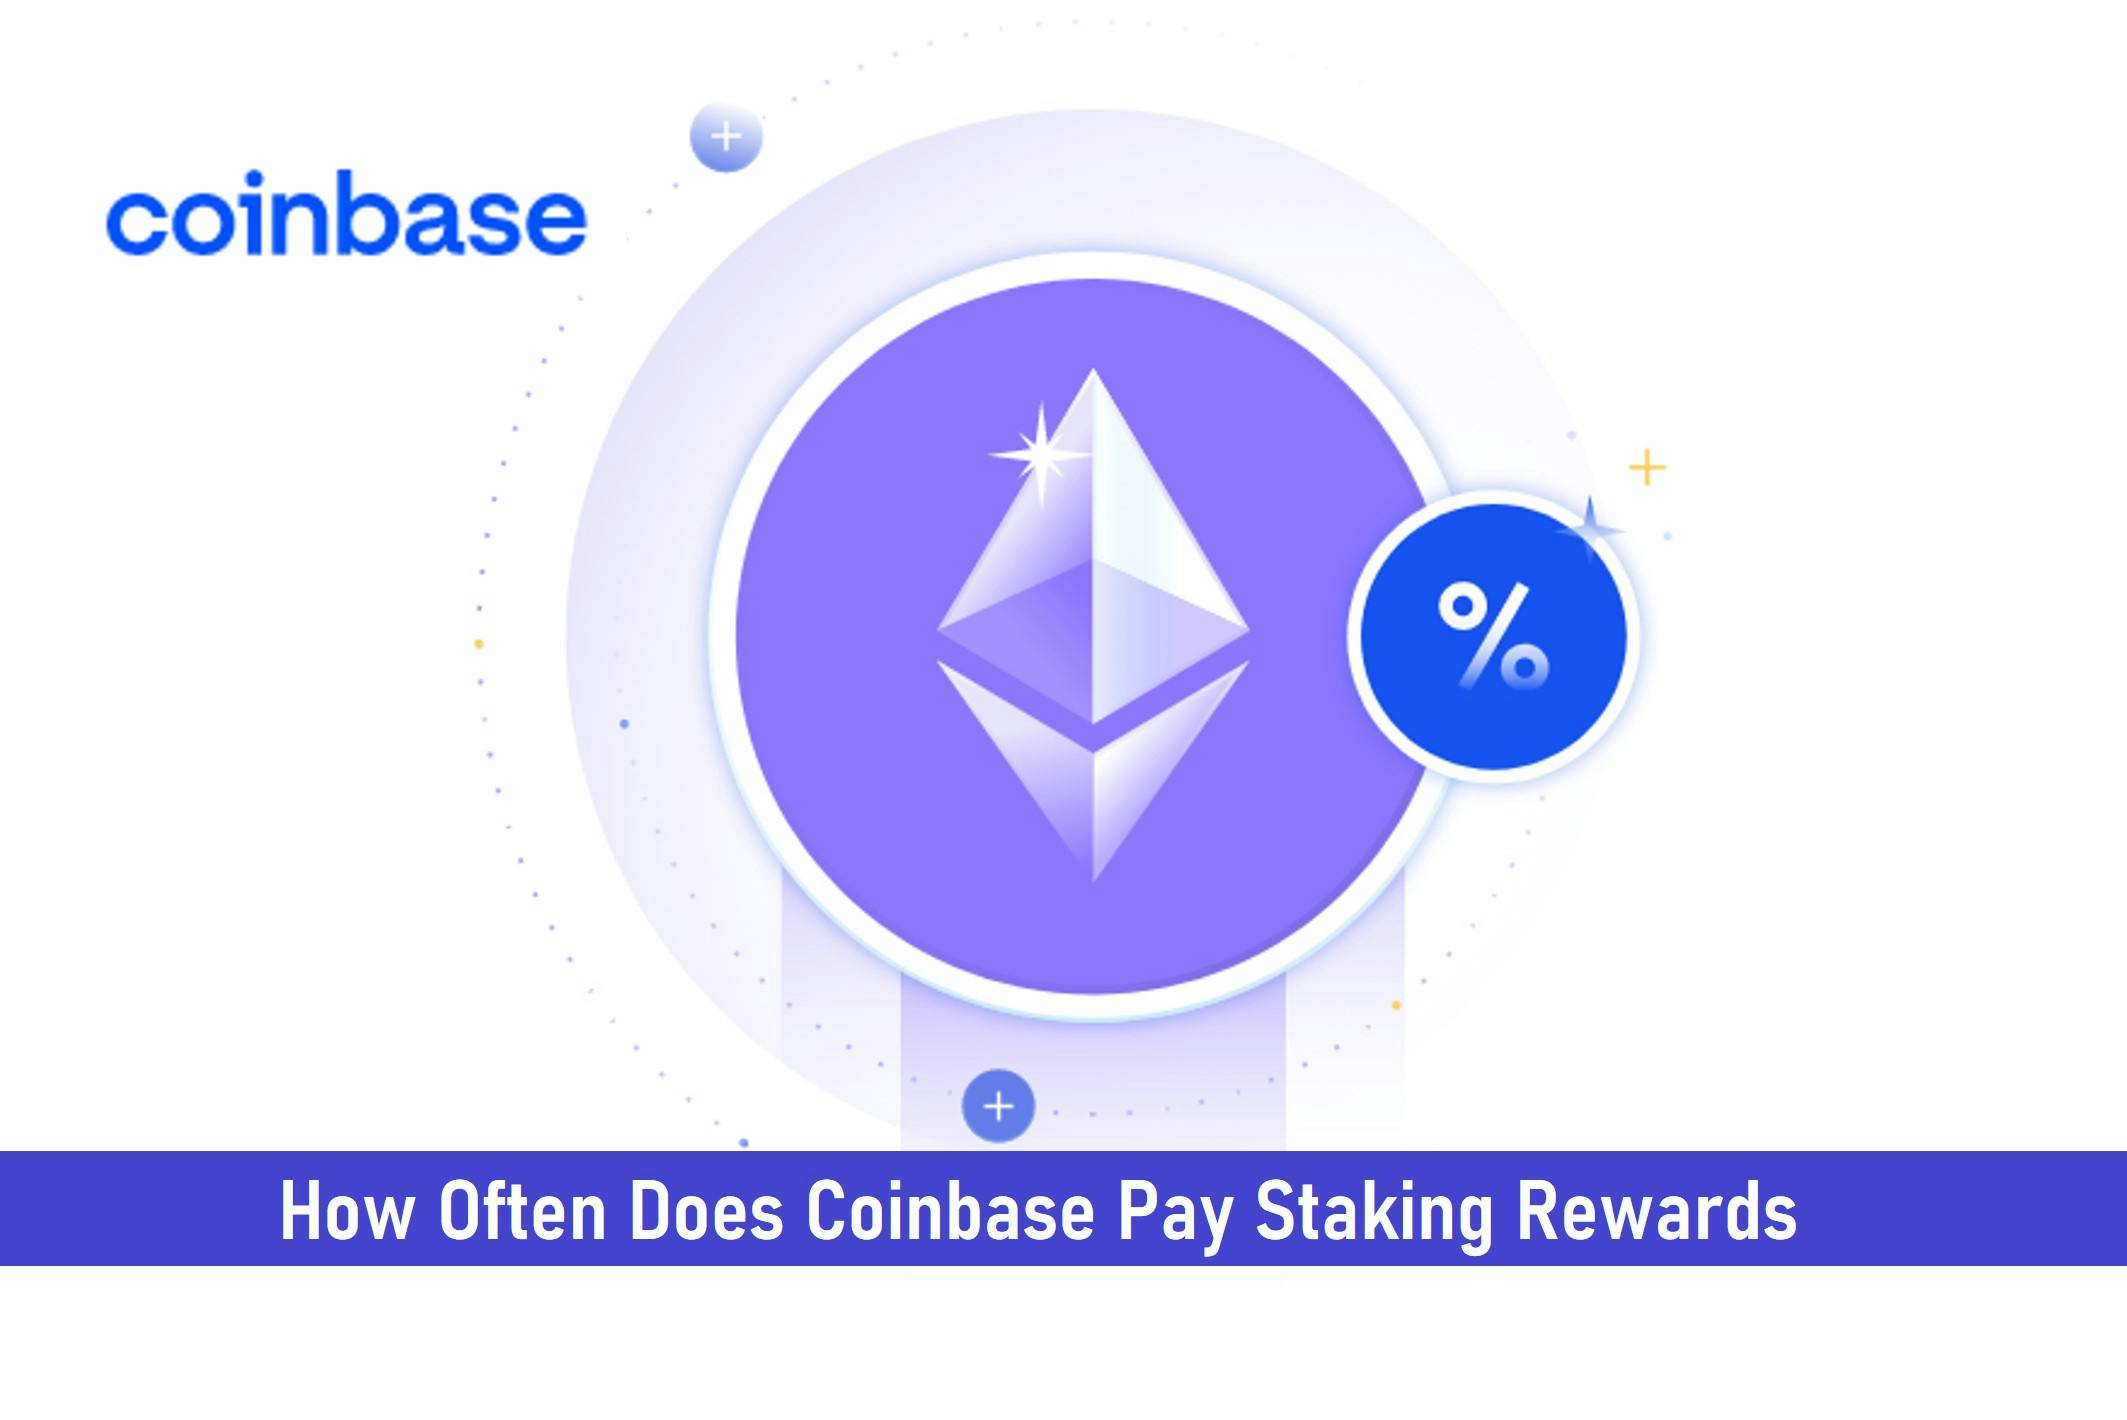 How Often Does Coinbase Pay Staking Rewards